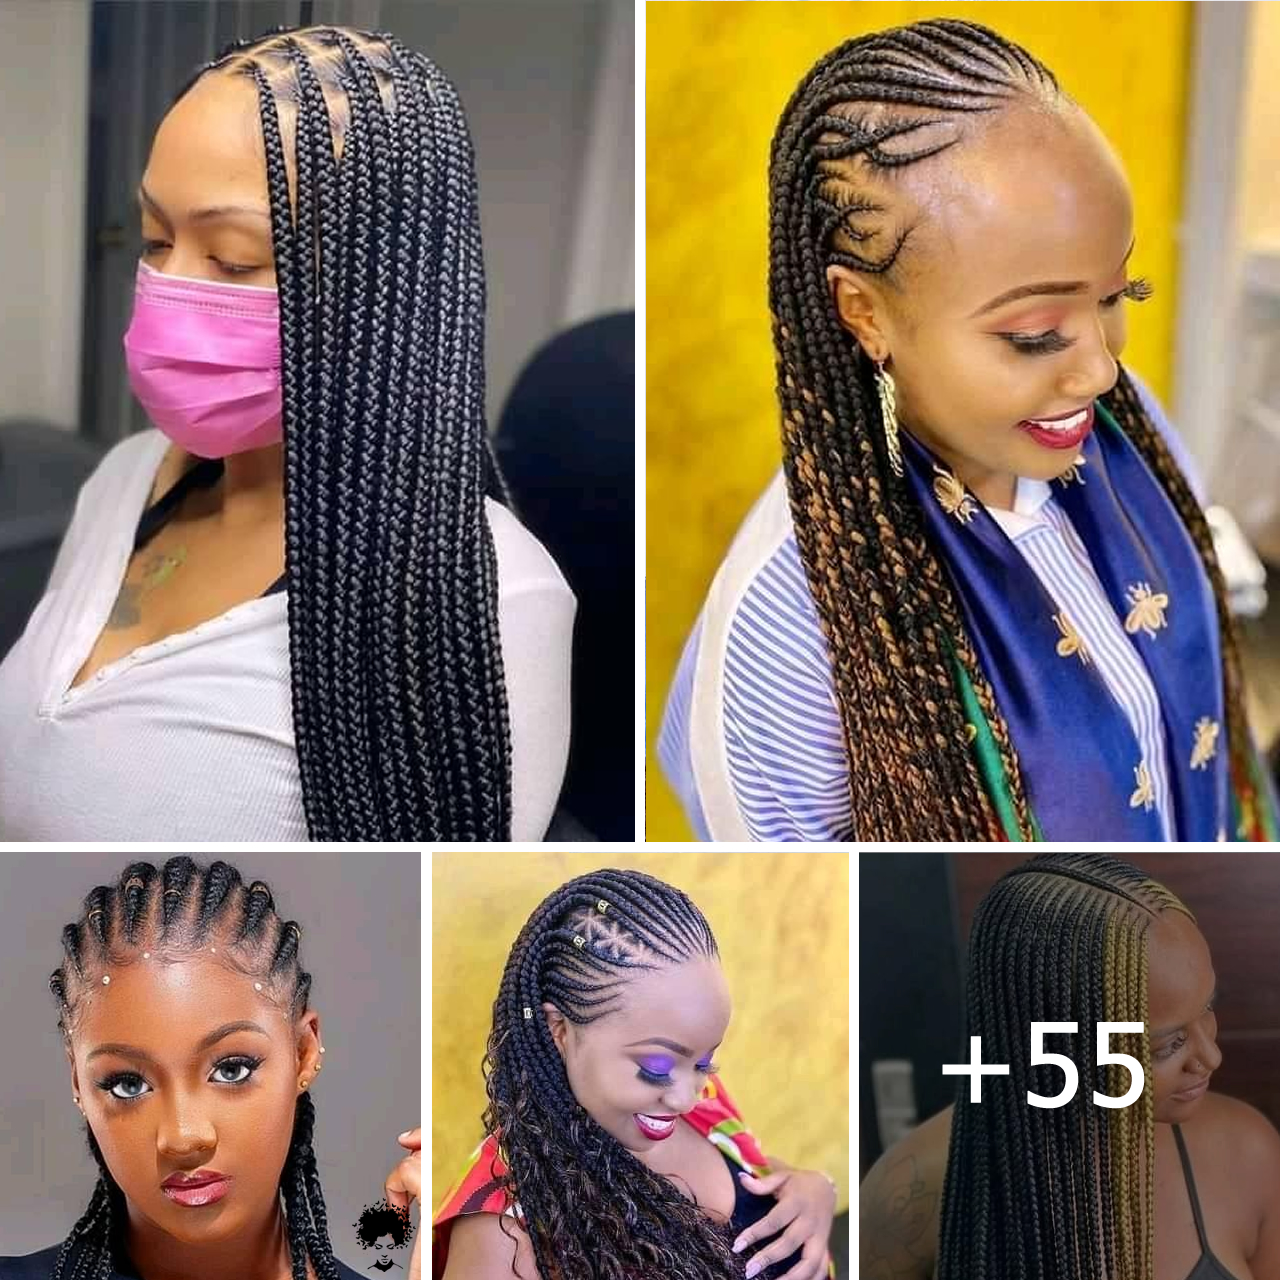 38+ Get Creative with the Latest Braids Hairstyles Ideas